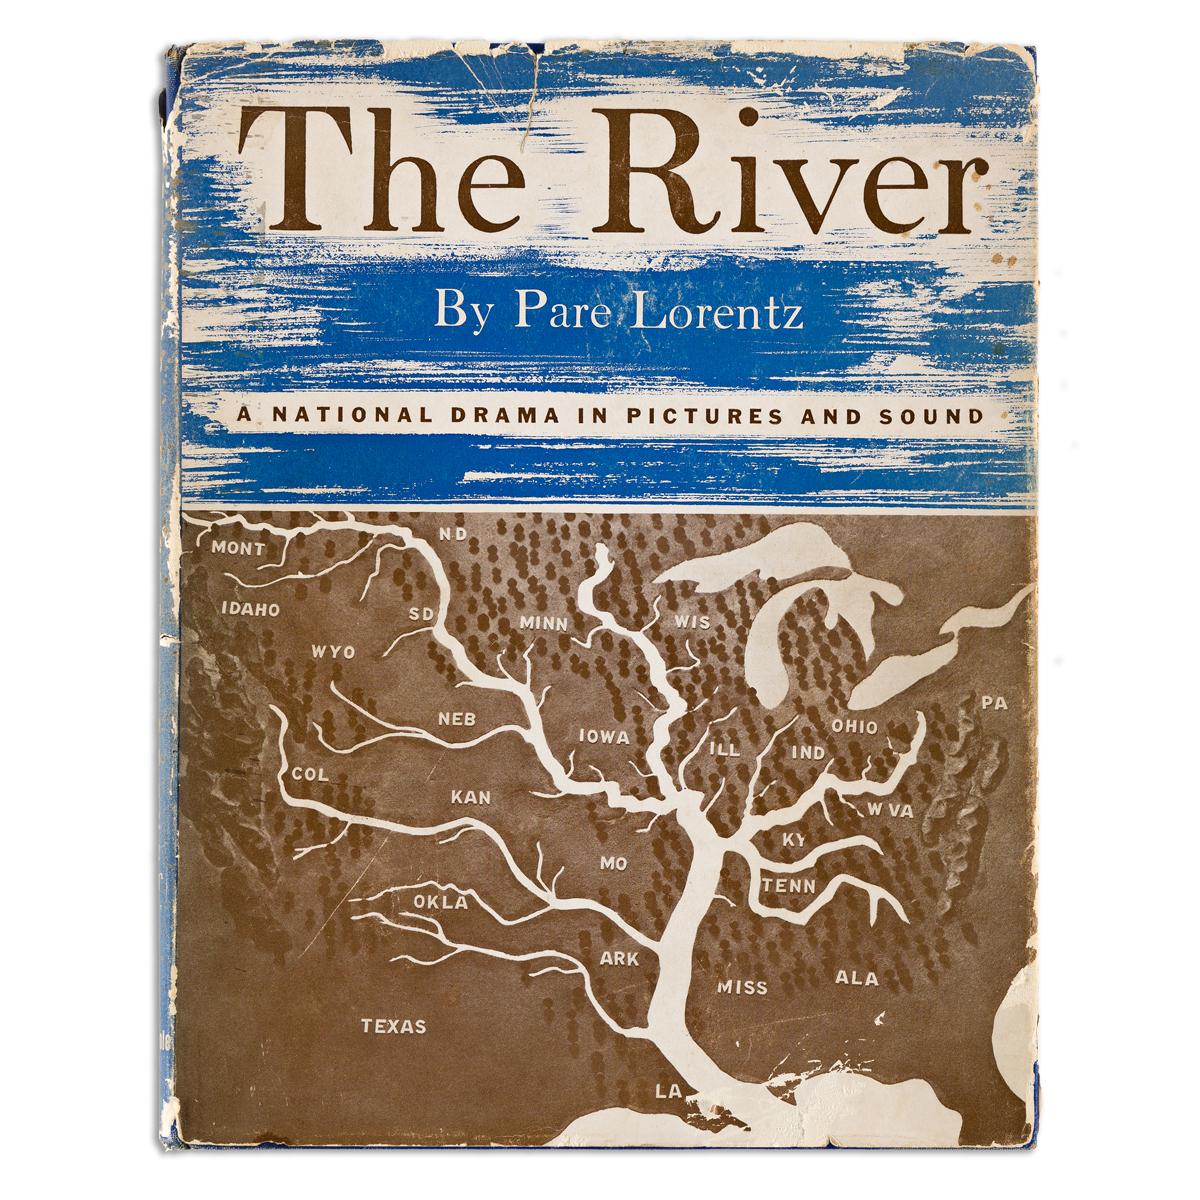 (MISSISSIPPI RIVER) A group of 30 production stills from Pare Lorentzs The River.